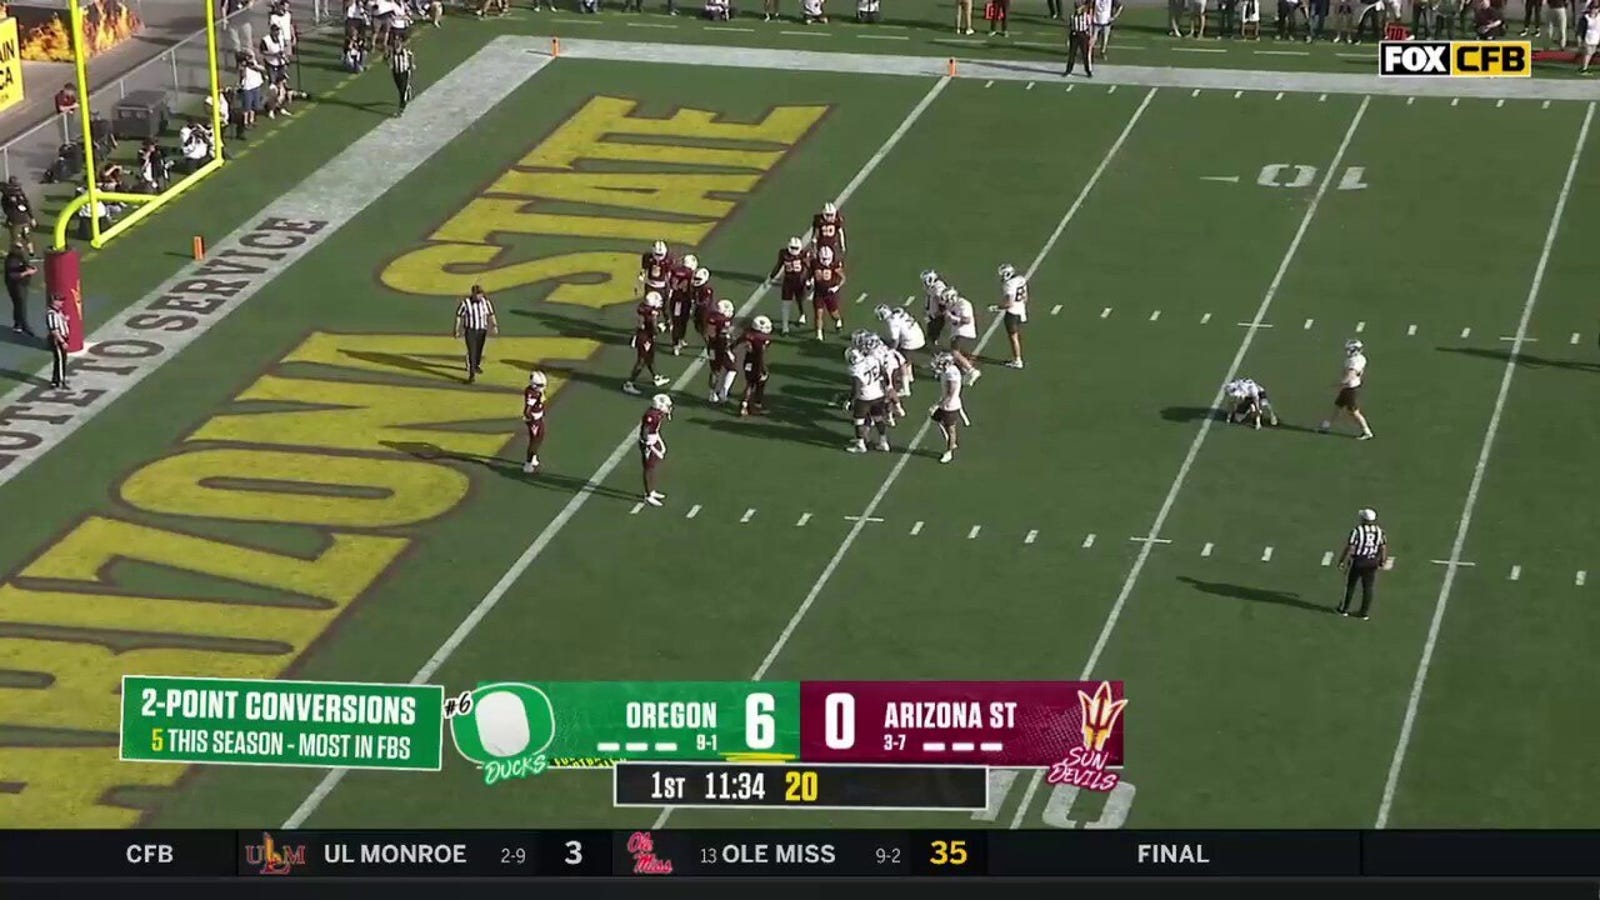 Bo Nix connects with Patrick Herbert on a 23-yard passing TD as Oregon strikes first against Arizona State 